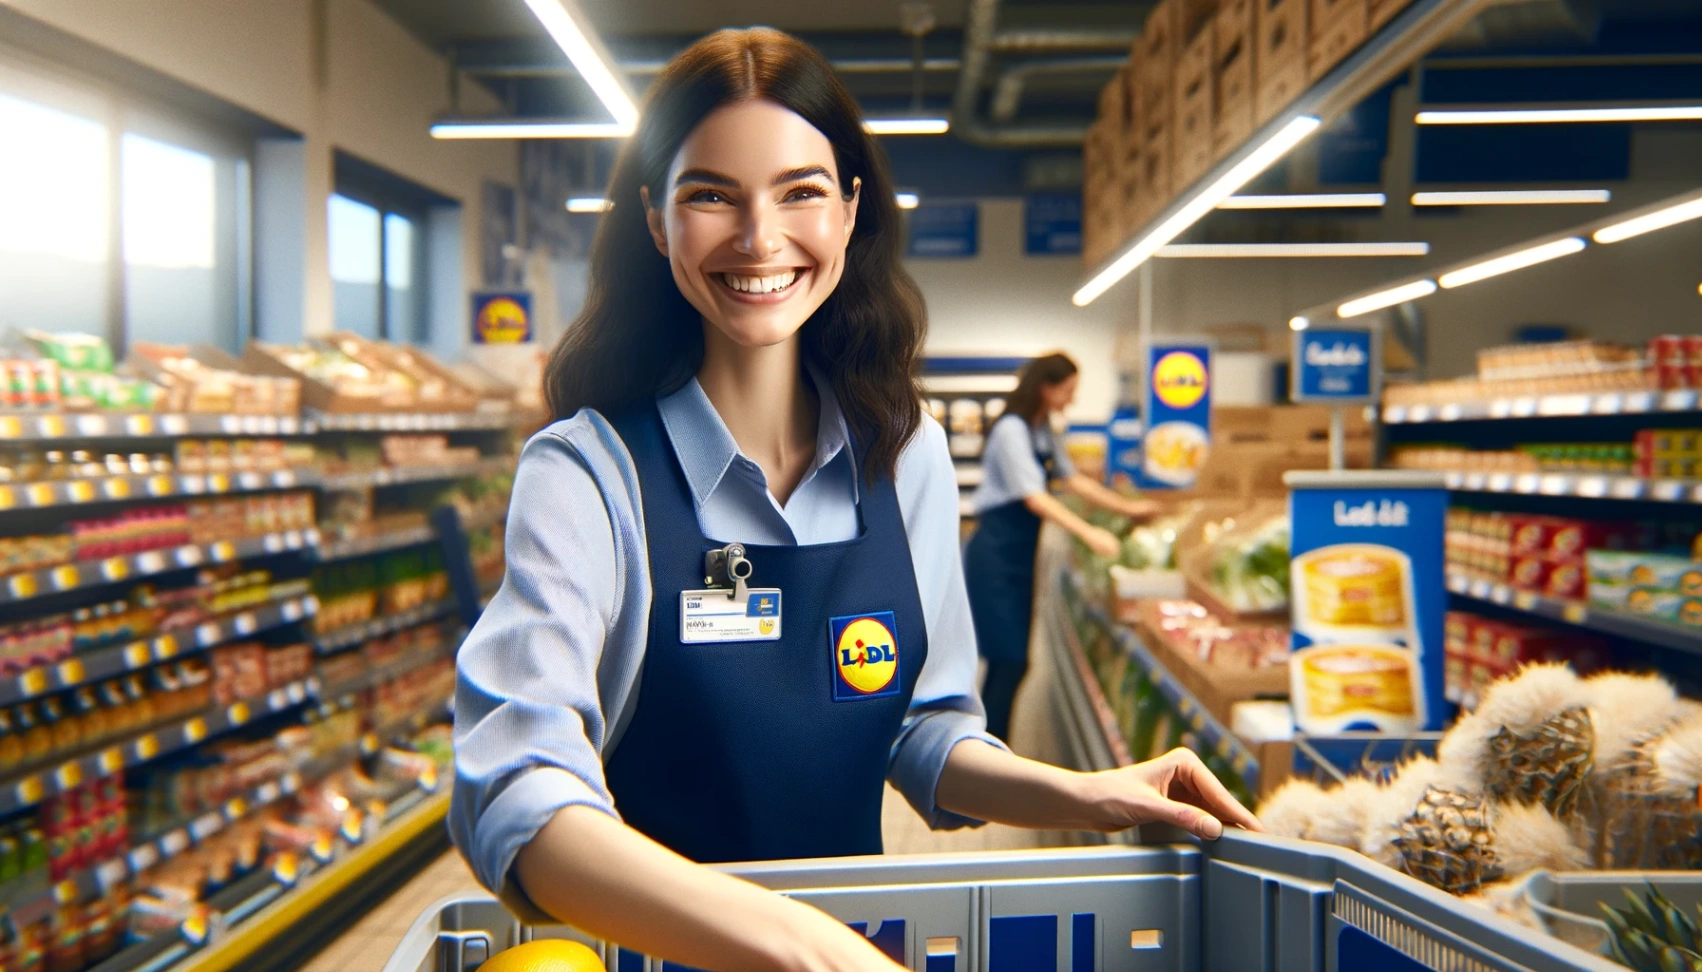 Lidl Jobs: Learn How to Apply for Positions